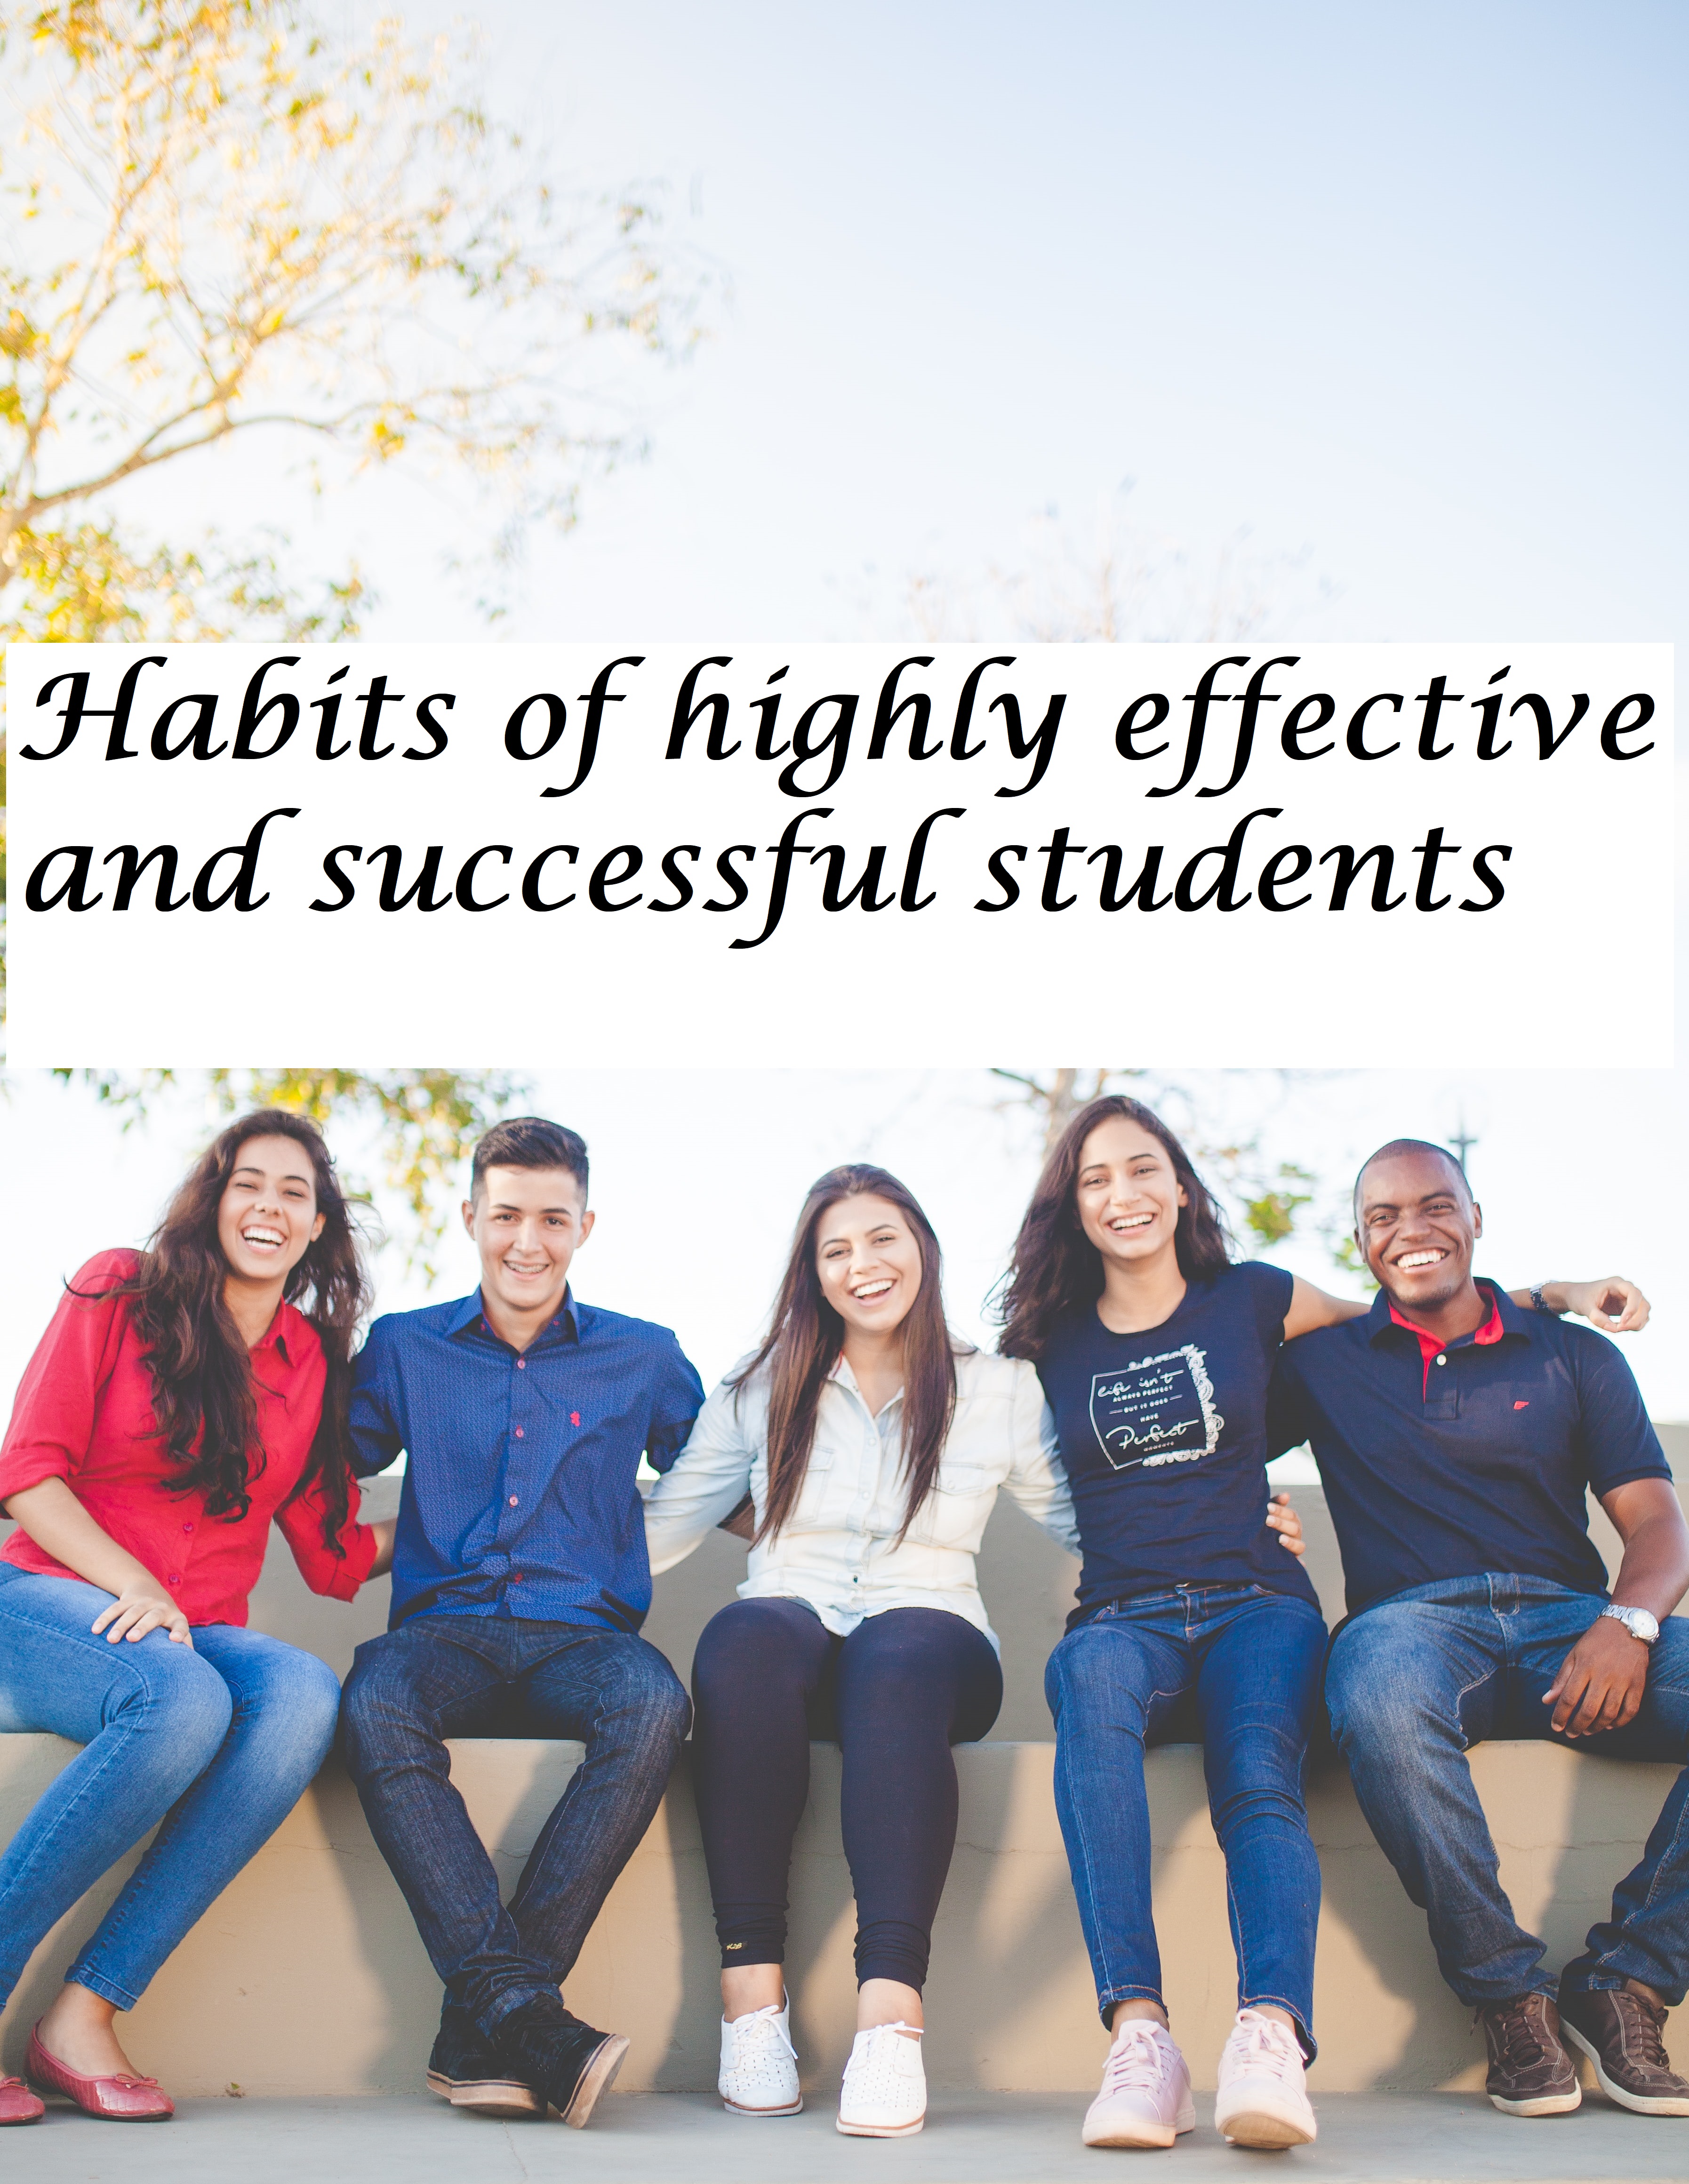 Habits of highly effective and successful students